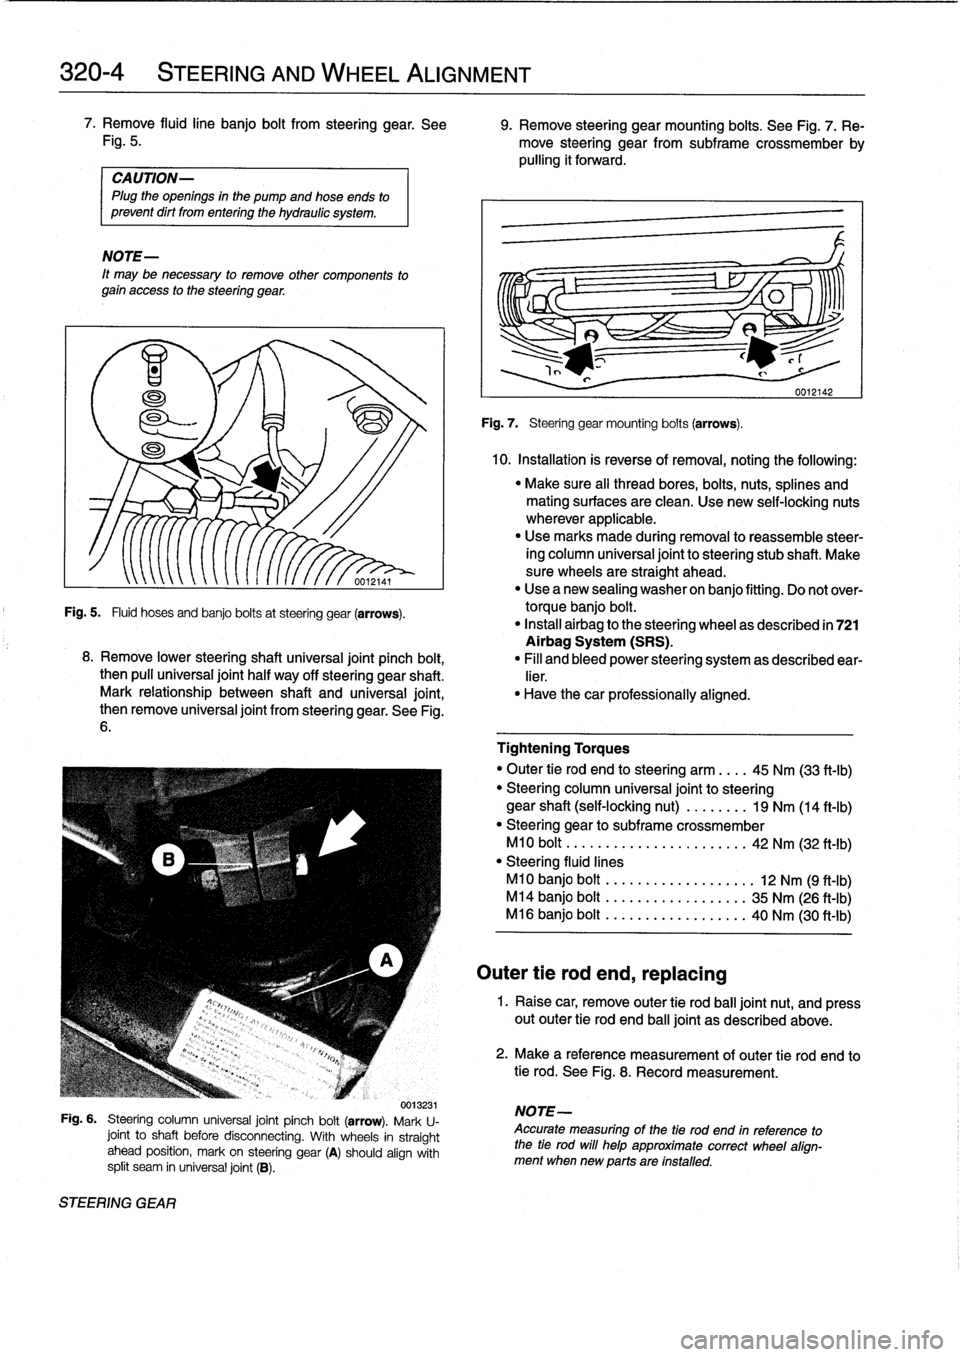 BMW 323i 1998 E36 Workshop Manual 
320-
4

	

STEERING
AND
WHEEL
ALIGNMENT

7
.
Remove
fluidline
banjo
bolt
from
steering
gear
.
See

	

9
.
Remove
steering
gearmounting
bolts
.
See
Fig
.
7
.
Re
Fig
.
5
.

	

move
steering
gear
from
s